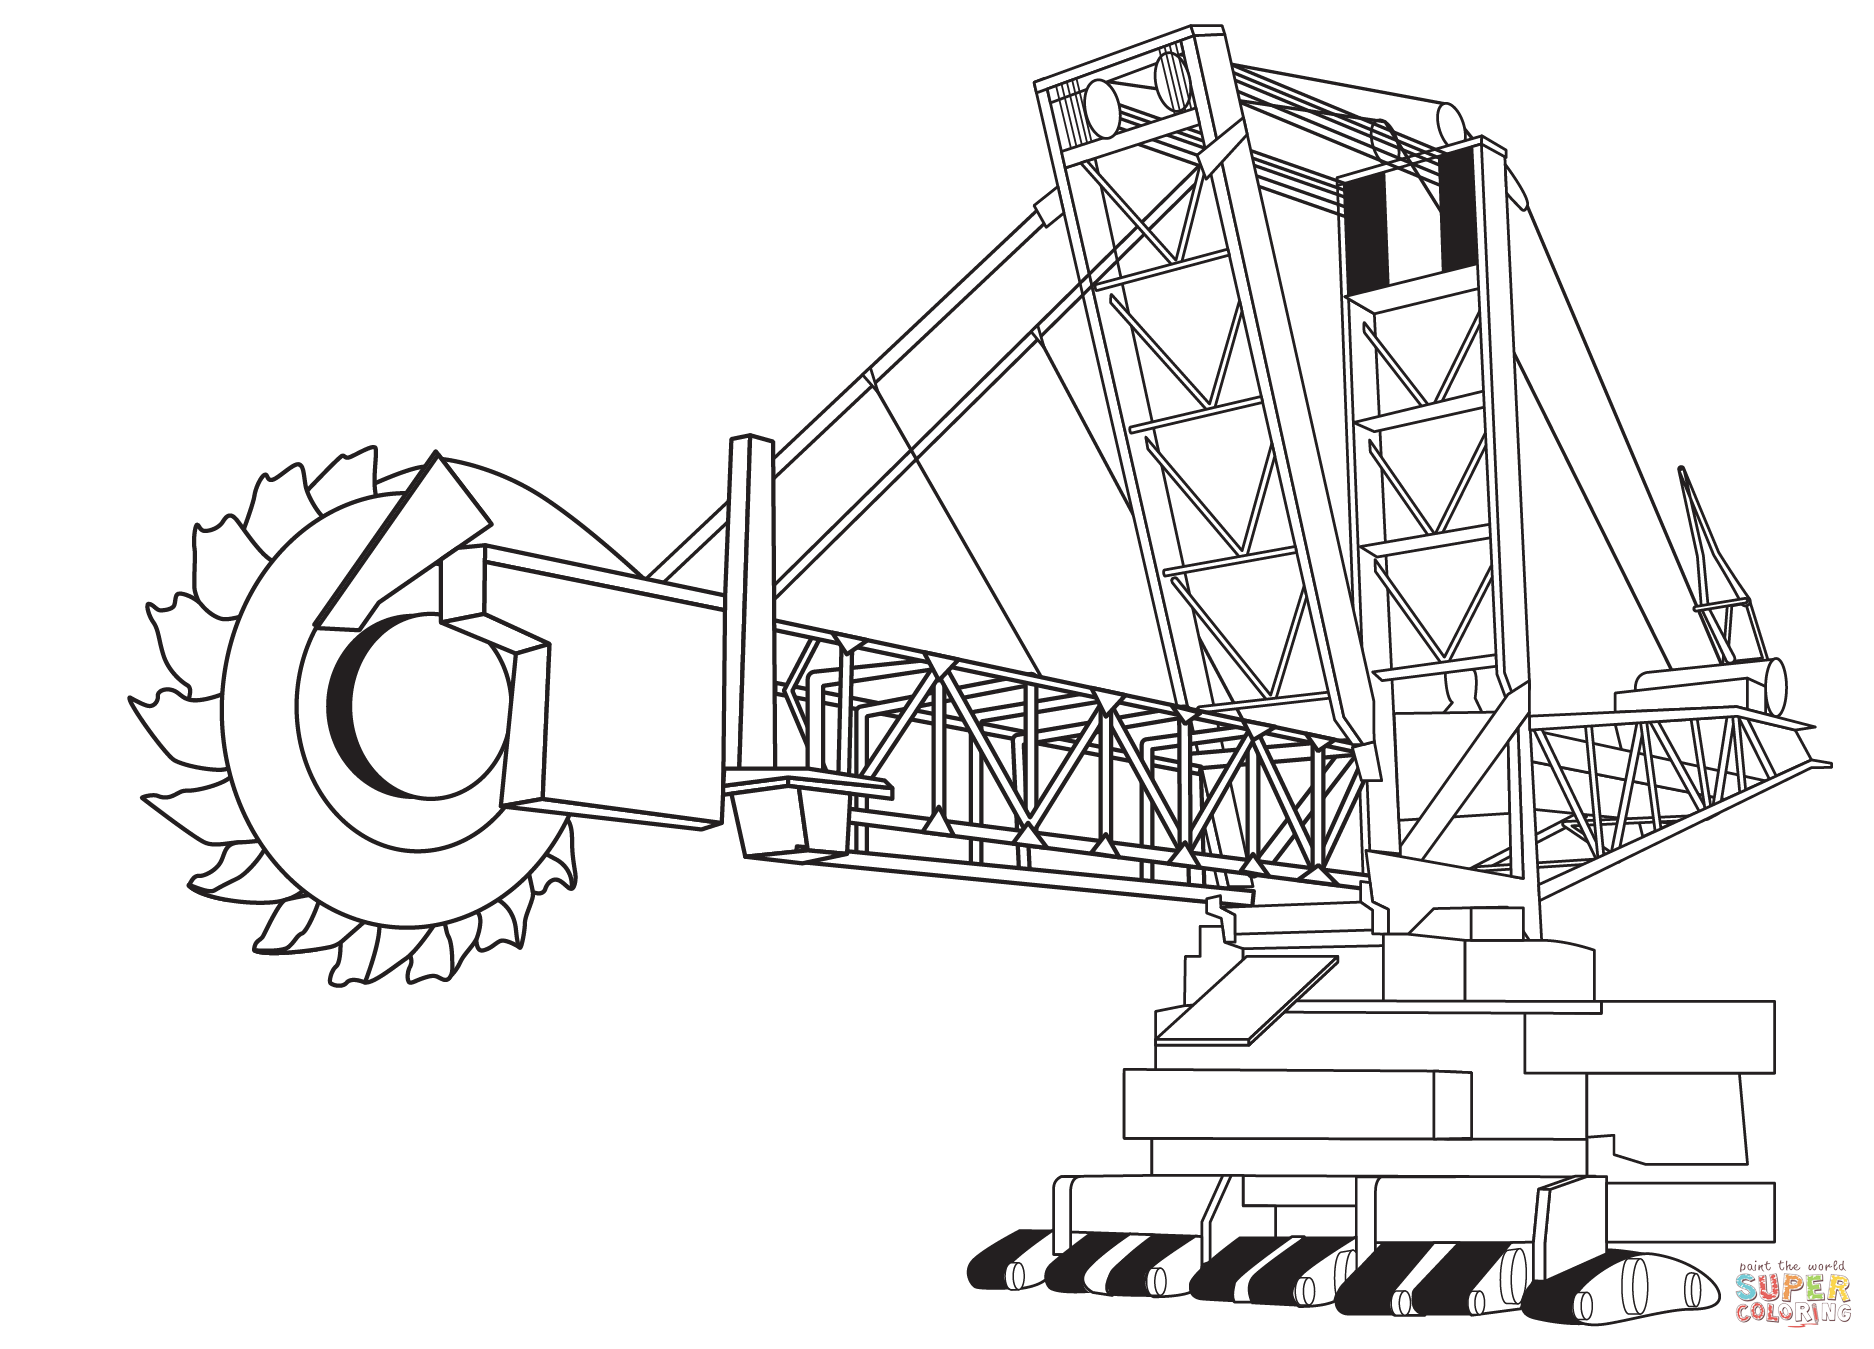 Bucket wheel excavator coloring page free printable coloring pages